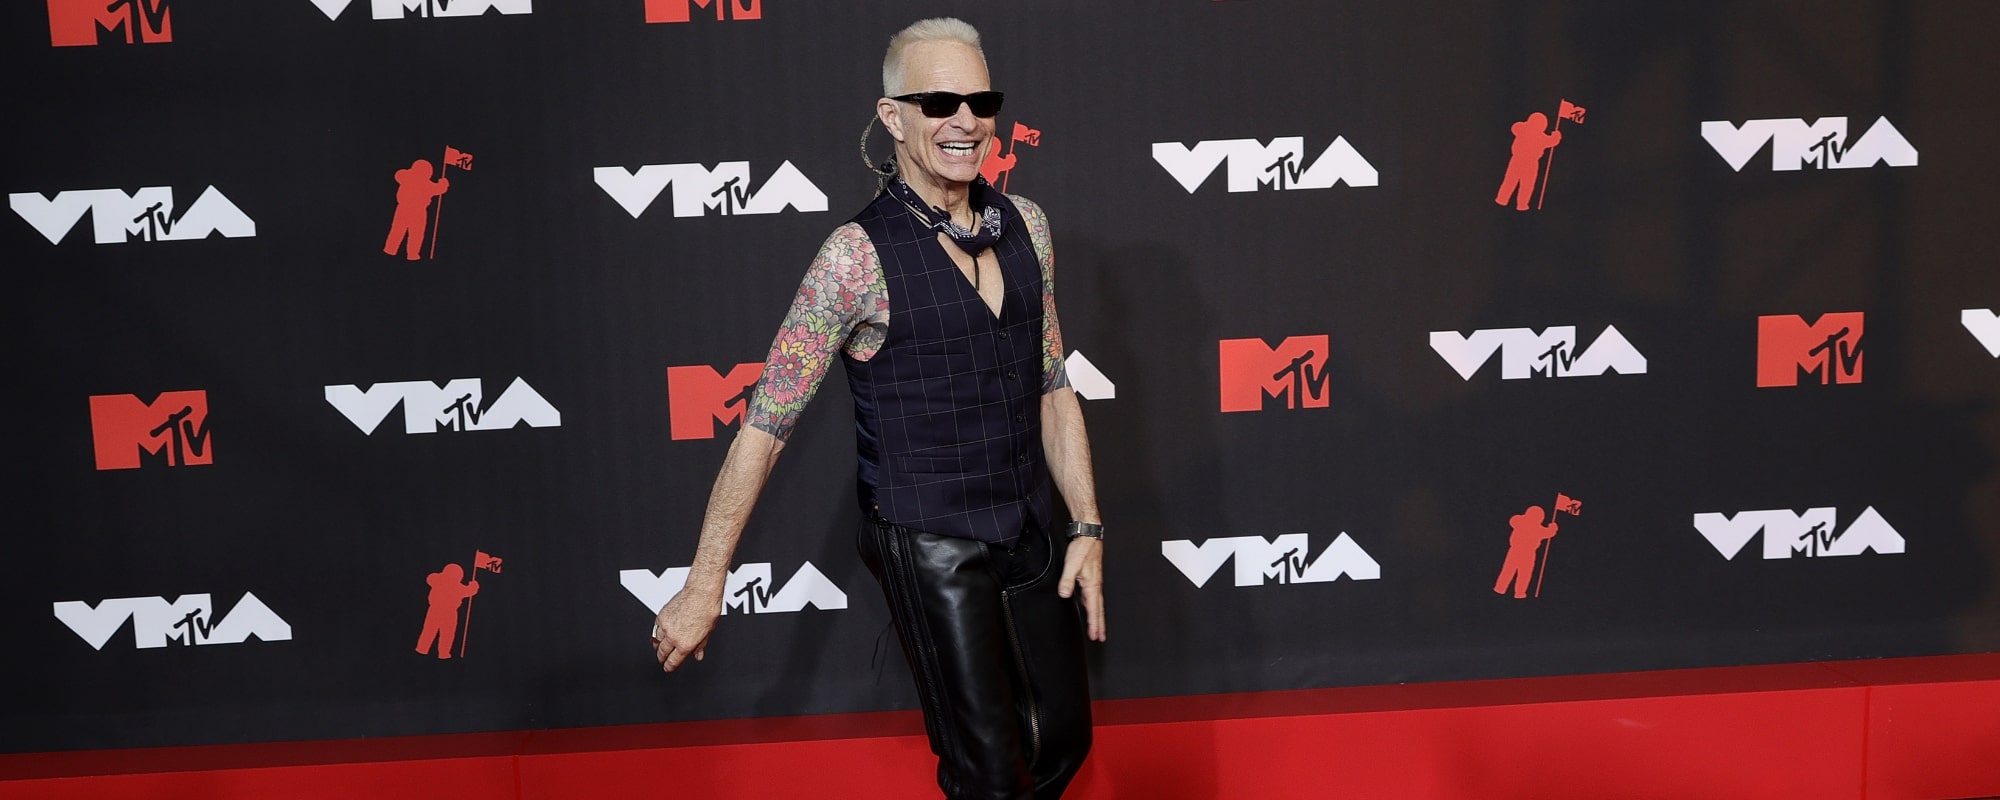 David Lee Roth Releases Bizarre Holiday Song “Talking Christmas Blues” Just in Time for Yuletide Season